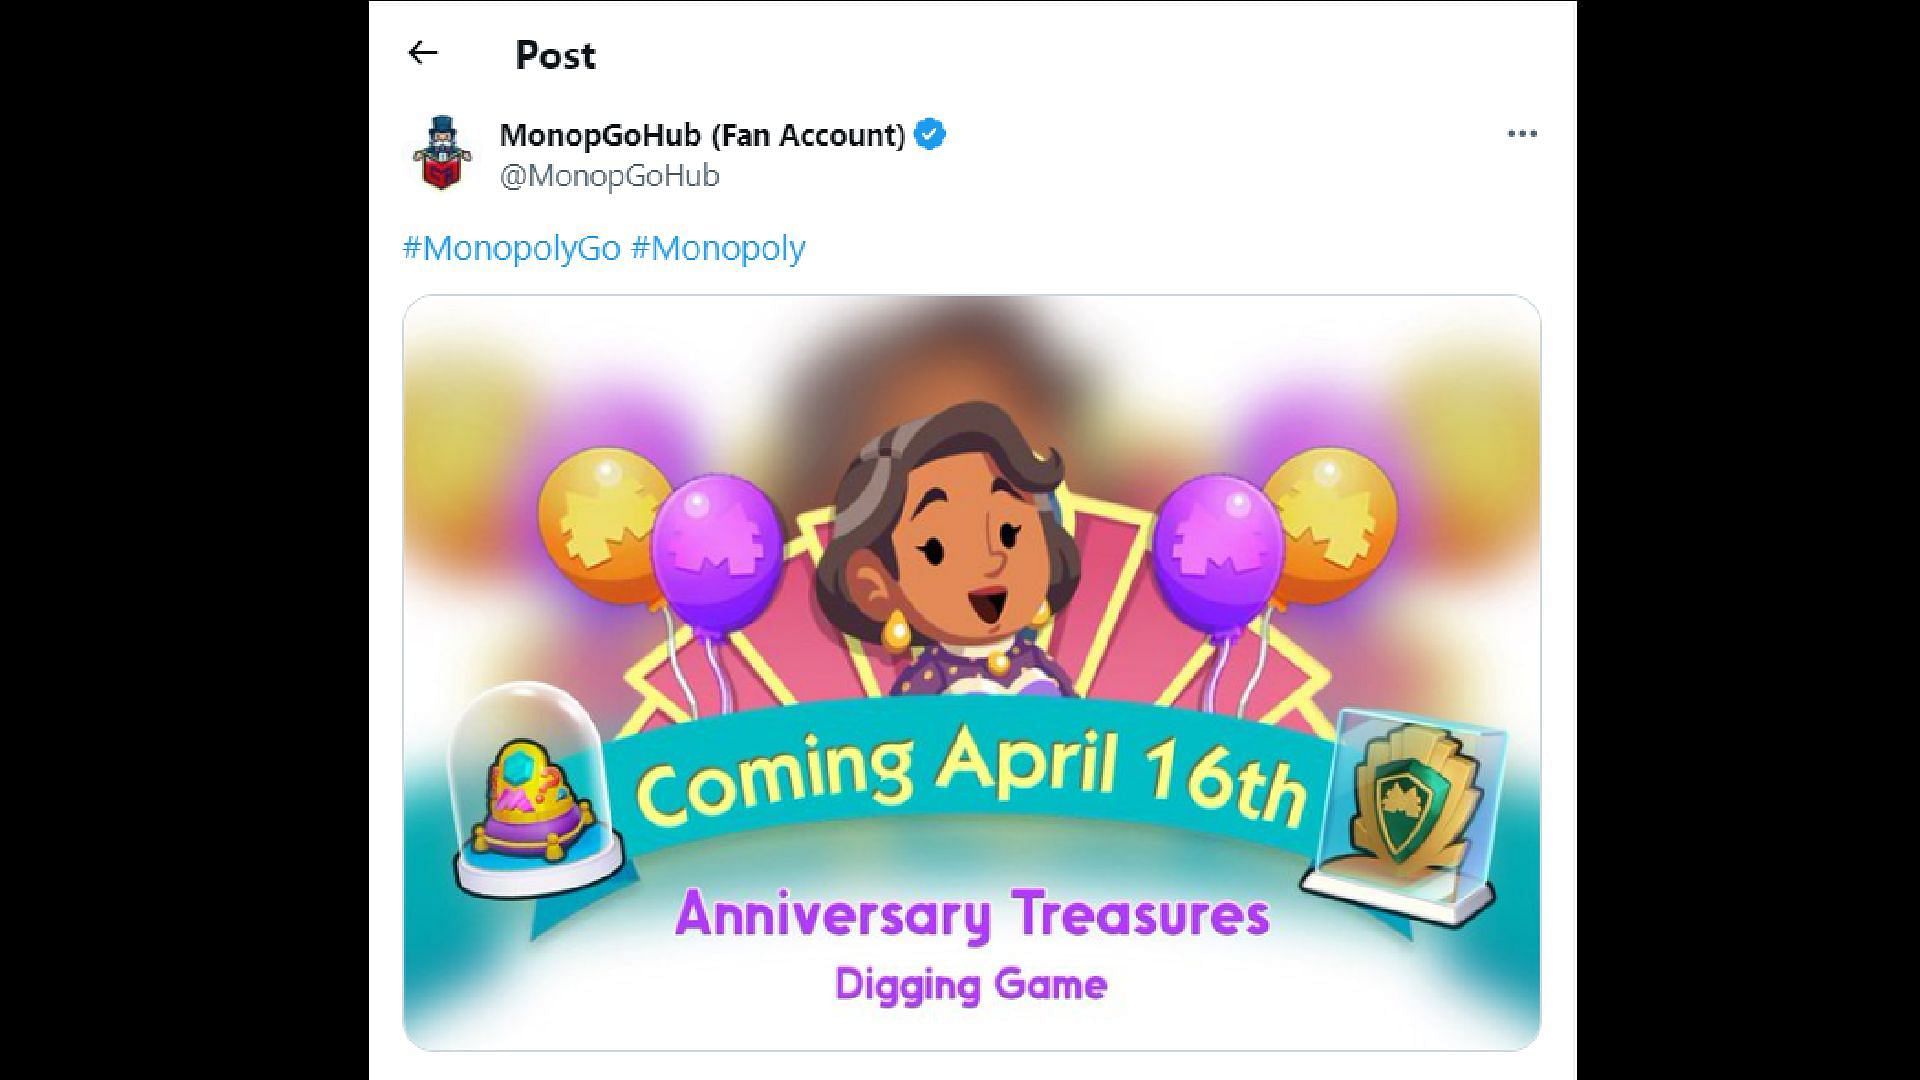 Other fan accounts have also started talking about the new event (Image via X/MonopGoHub)